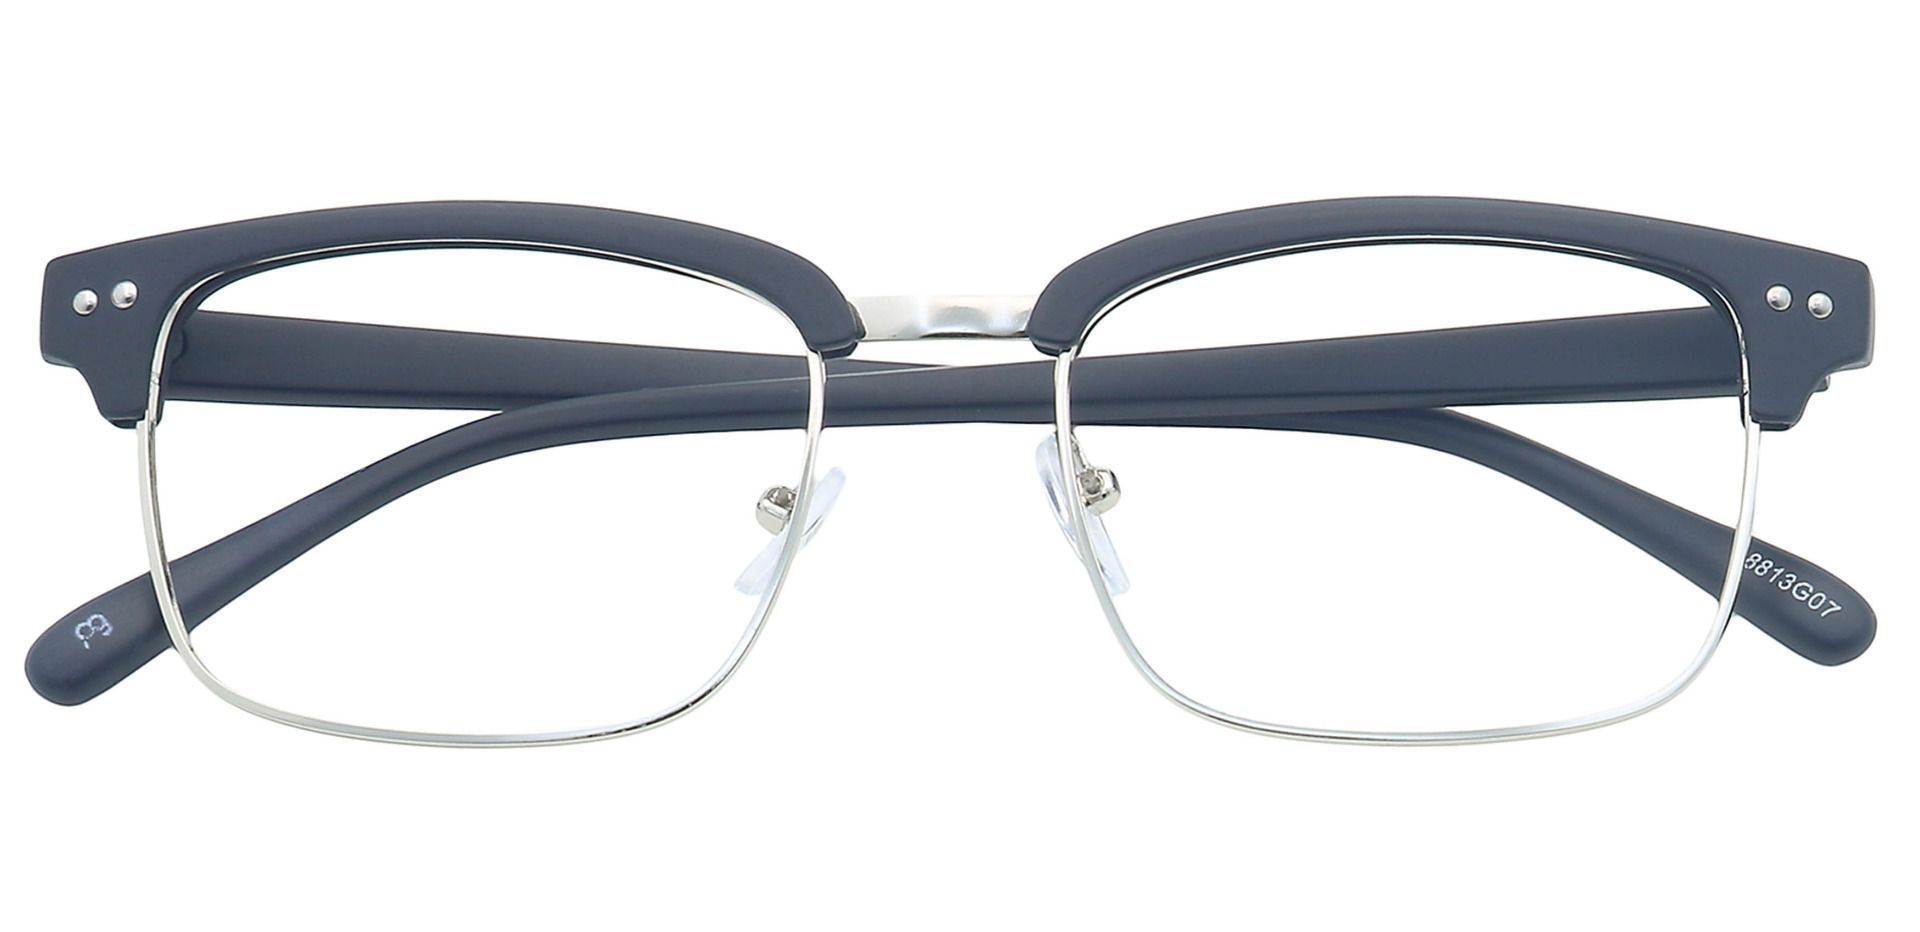 A pair of glasses with black Prestige Browline frames.